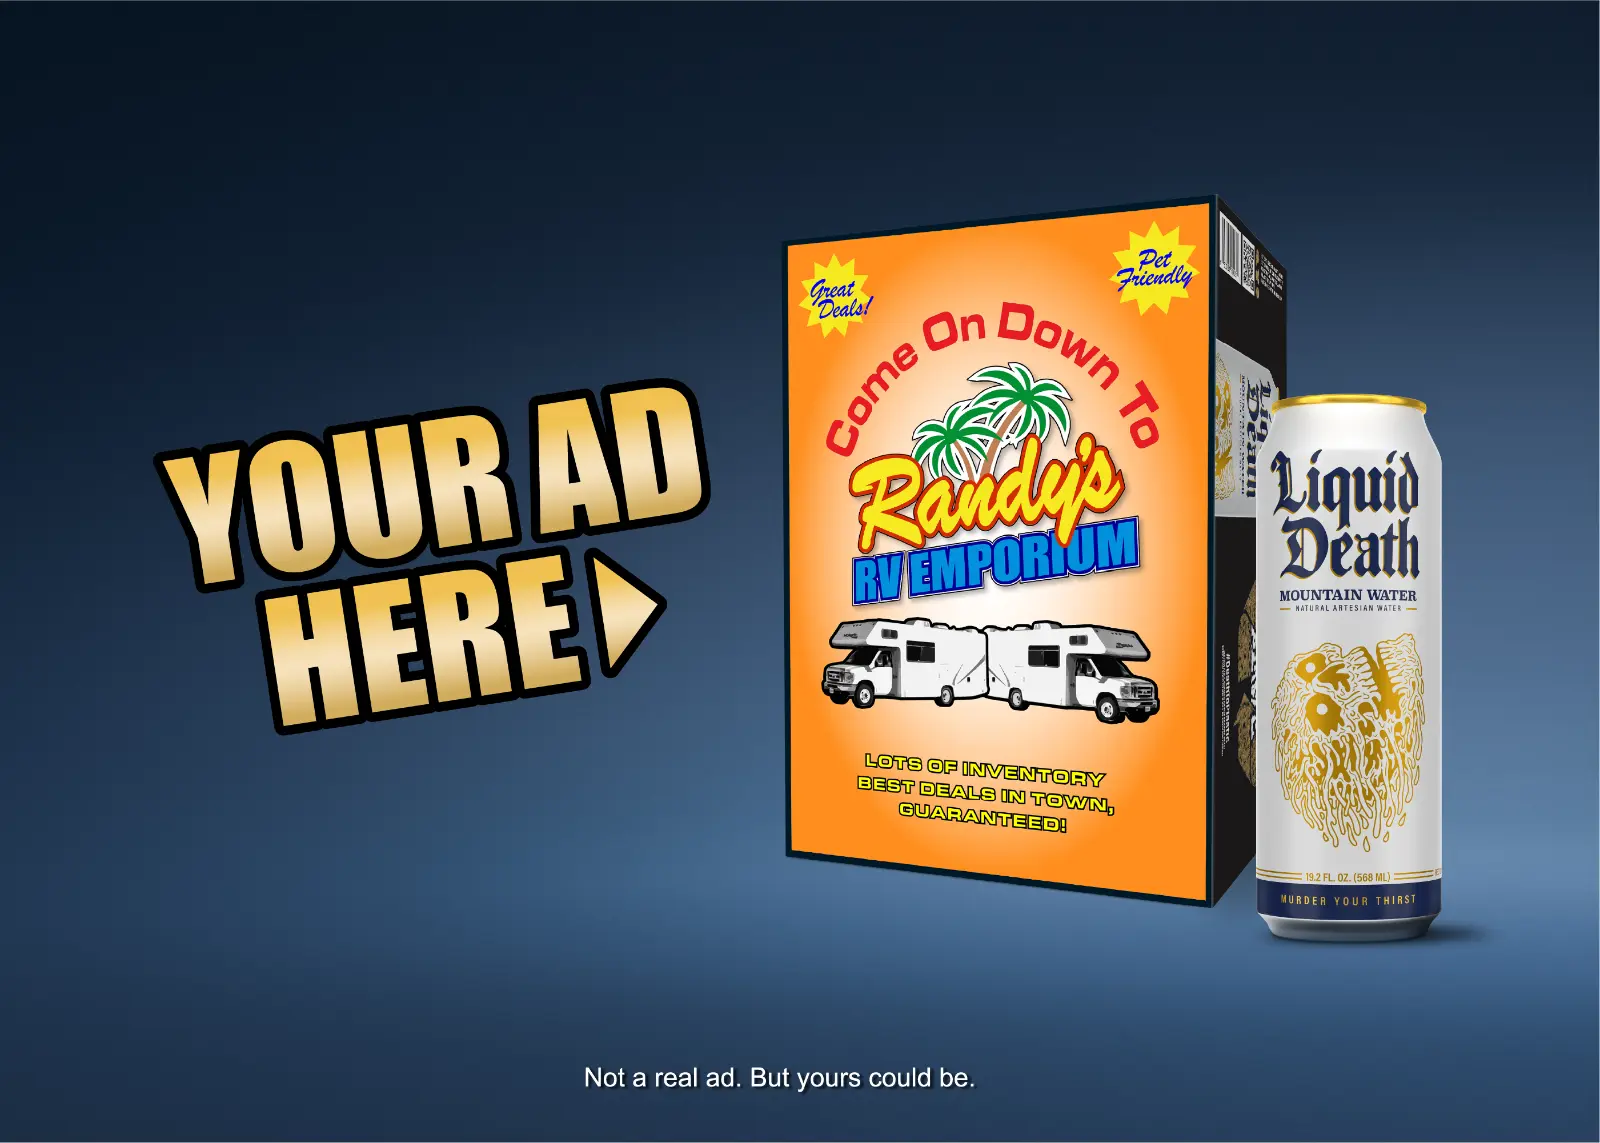 Liquid Death Auctions off Ad Space on Packaging and Foregoes Running a Super Bowl Ad